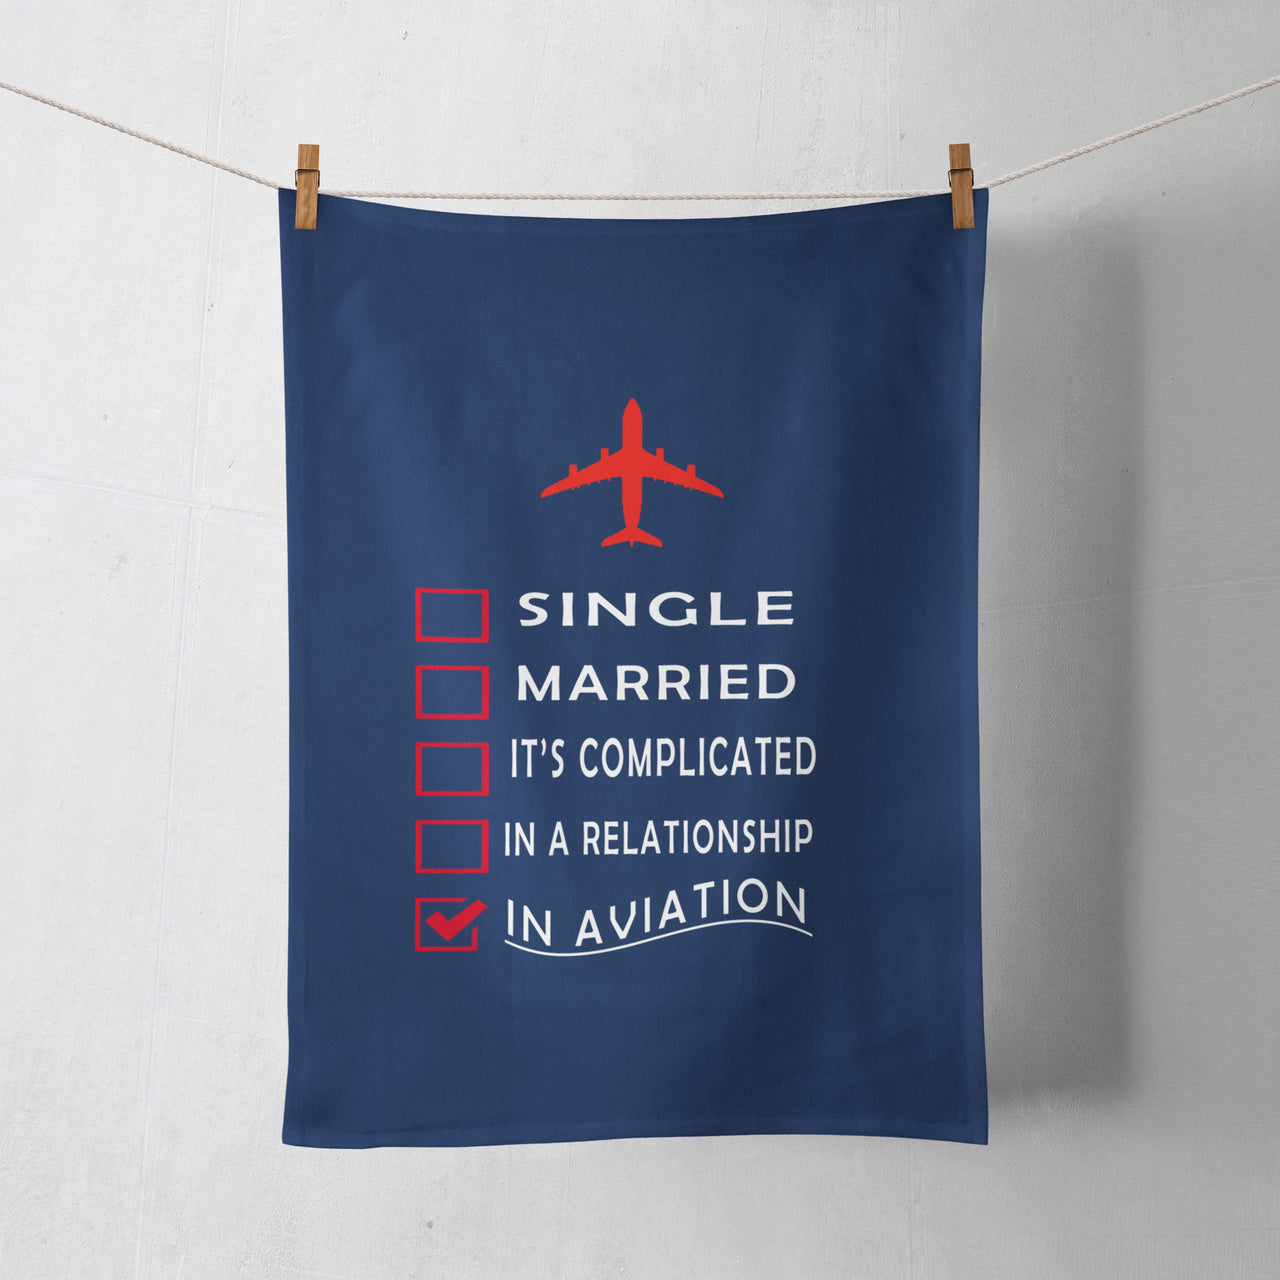 In Aviation Designed Towels